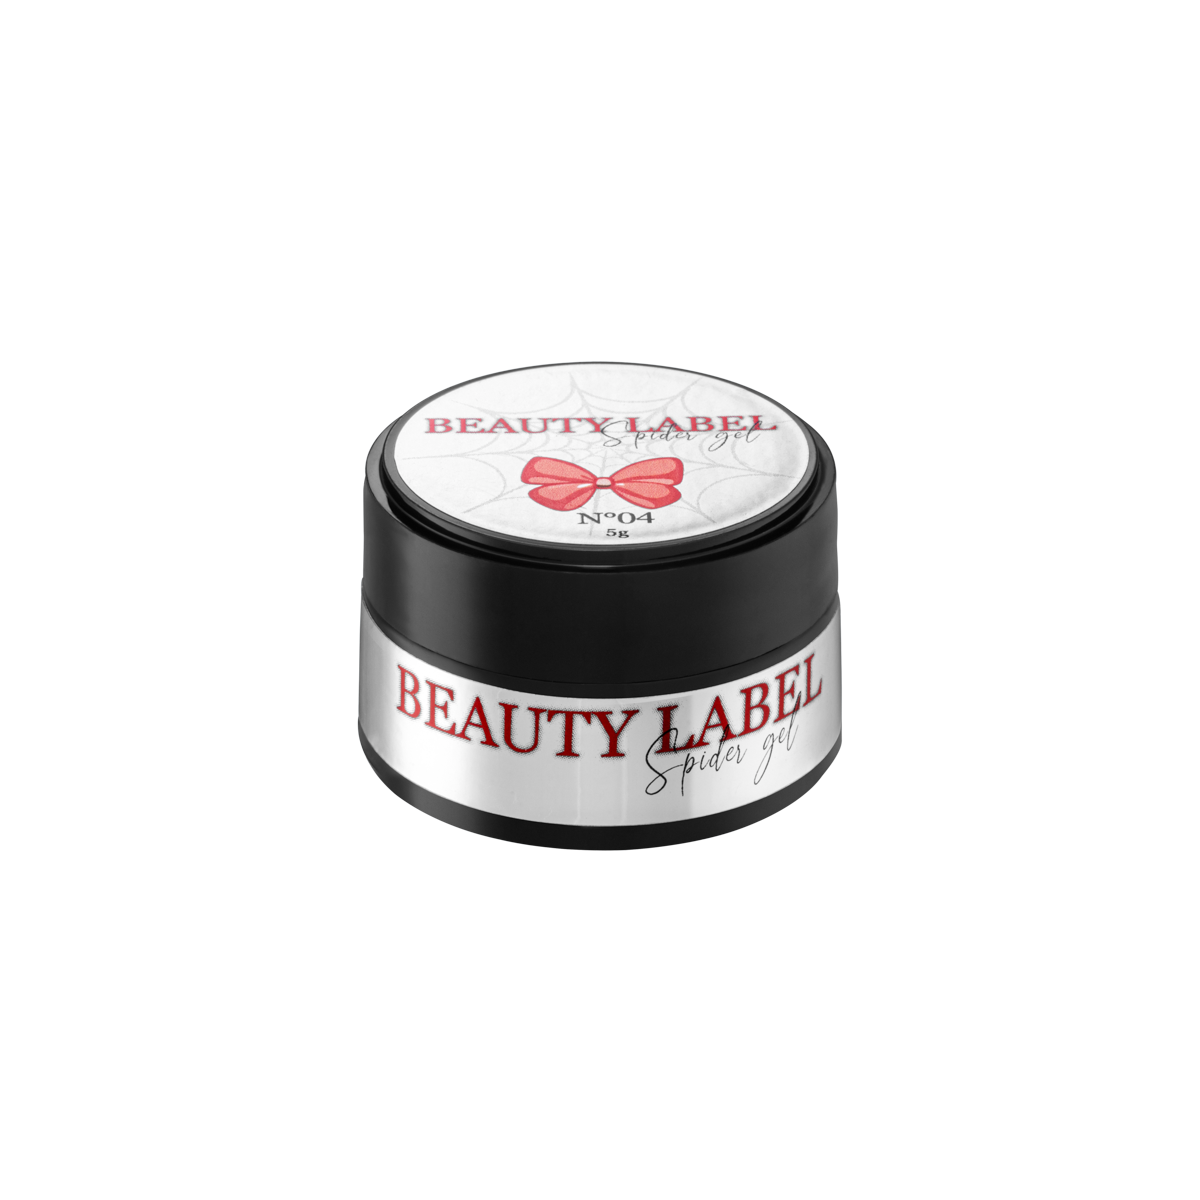 Beauty Label Spider Gel No.4 Vuur rood